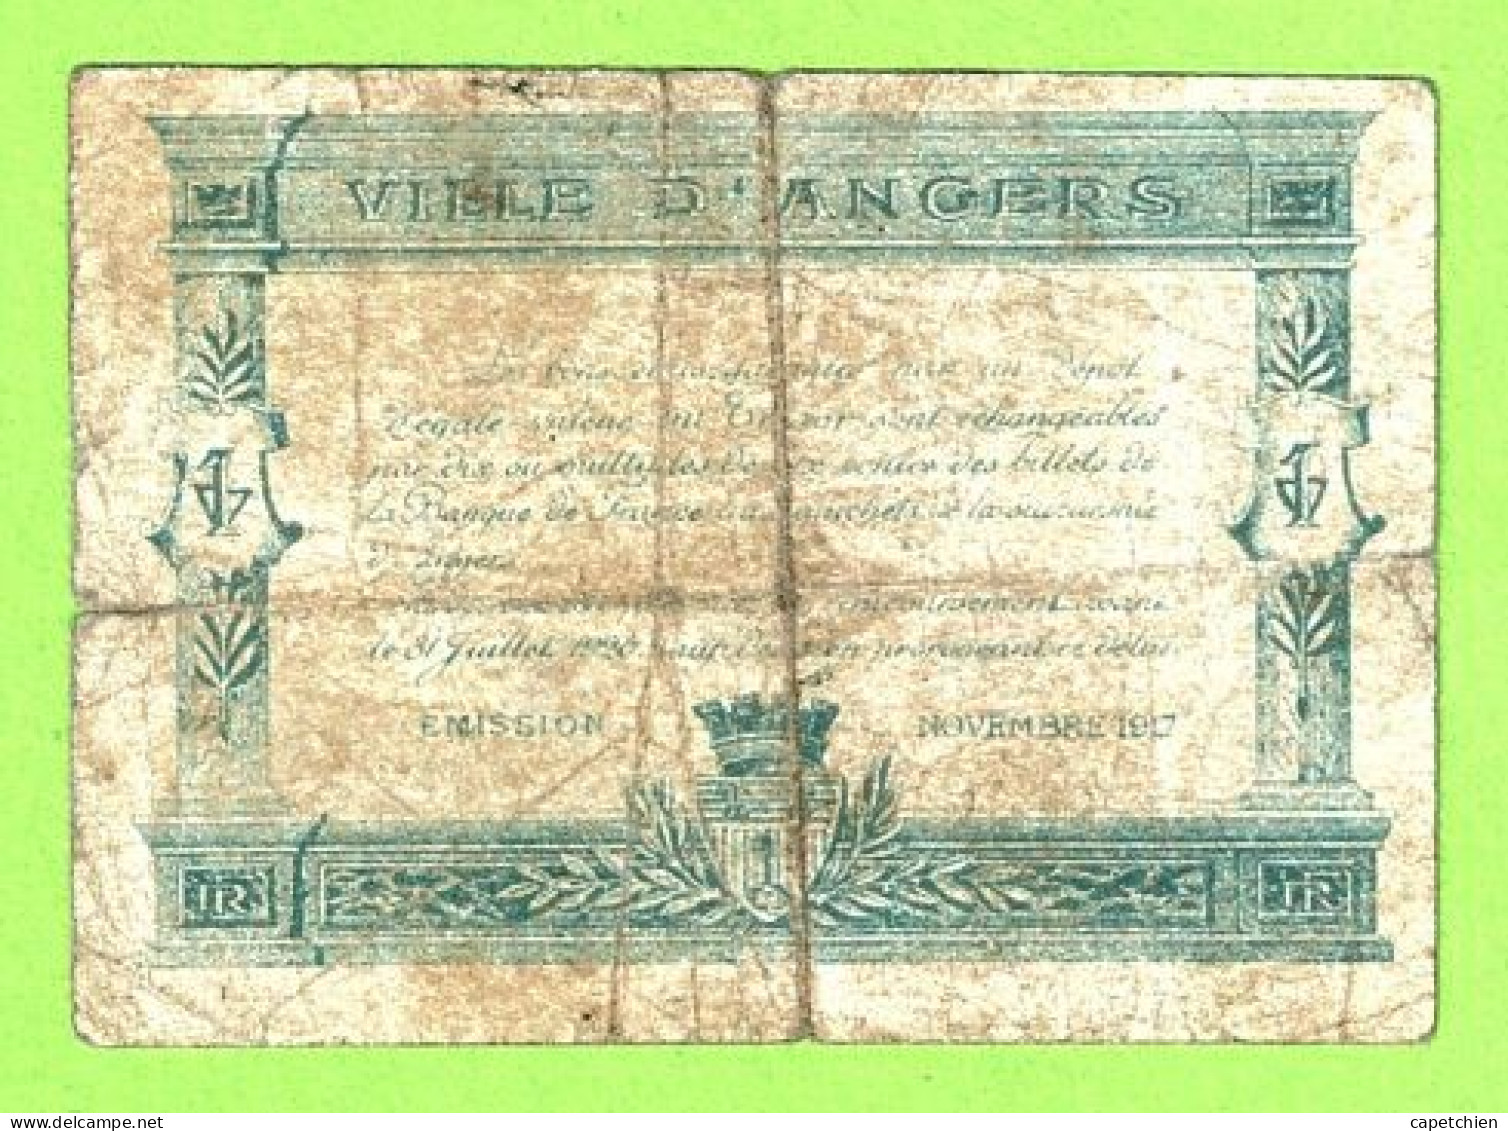 FRANCE / ANGERS / CHAMBRE DE COMMERCE / 25 CENT / NOVEMBRE 1917 - Chamber Of Commerce